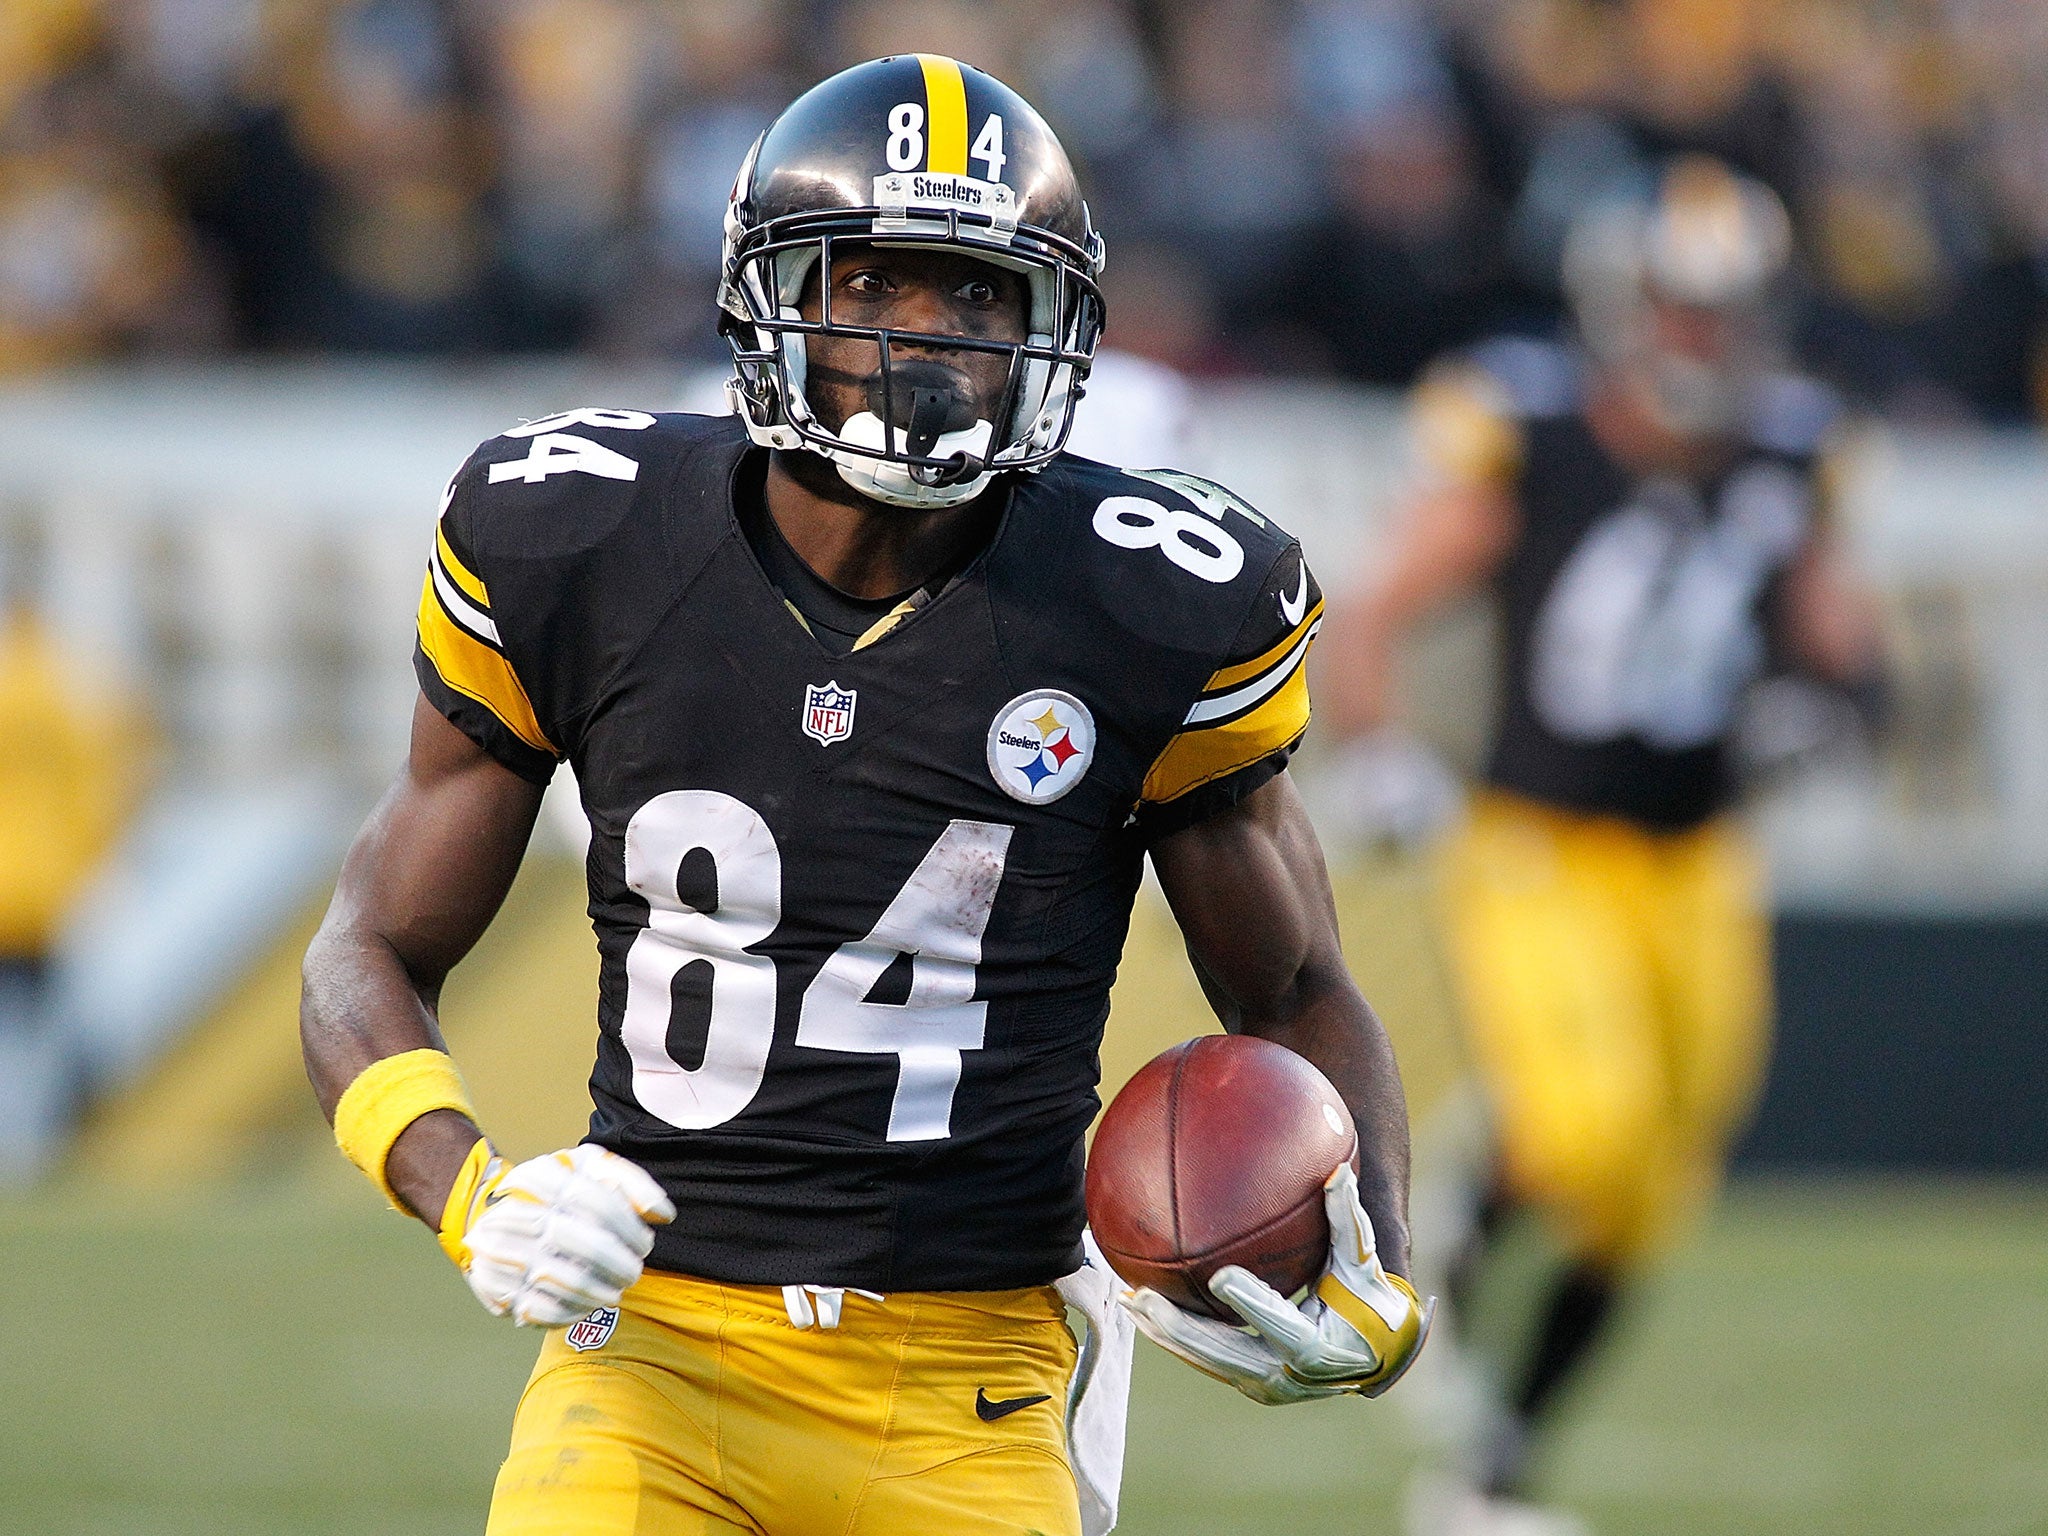 Antonio Brown wants to leave the organisation that drafted him